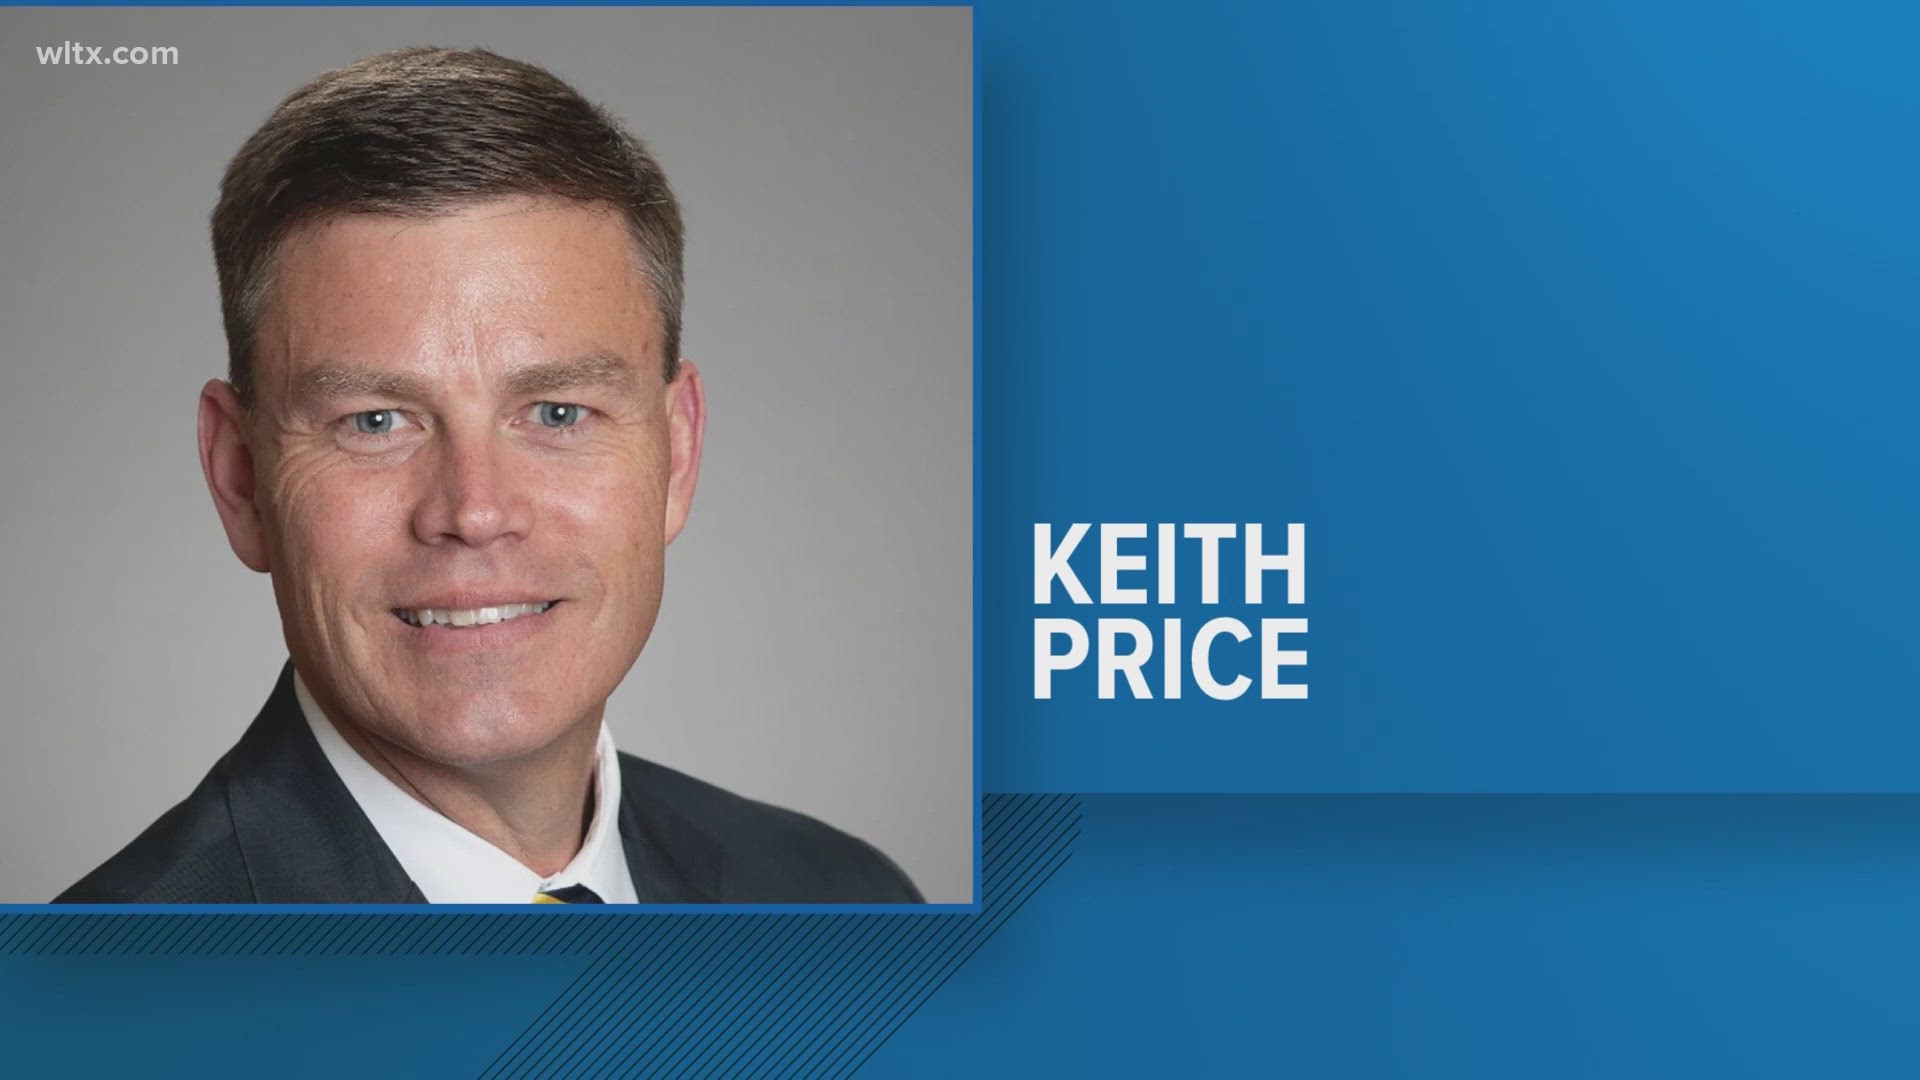 Keith Price was voted as superintendent elect last night.